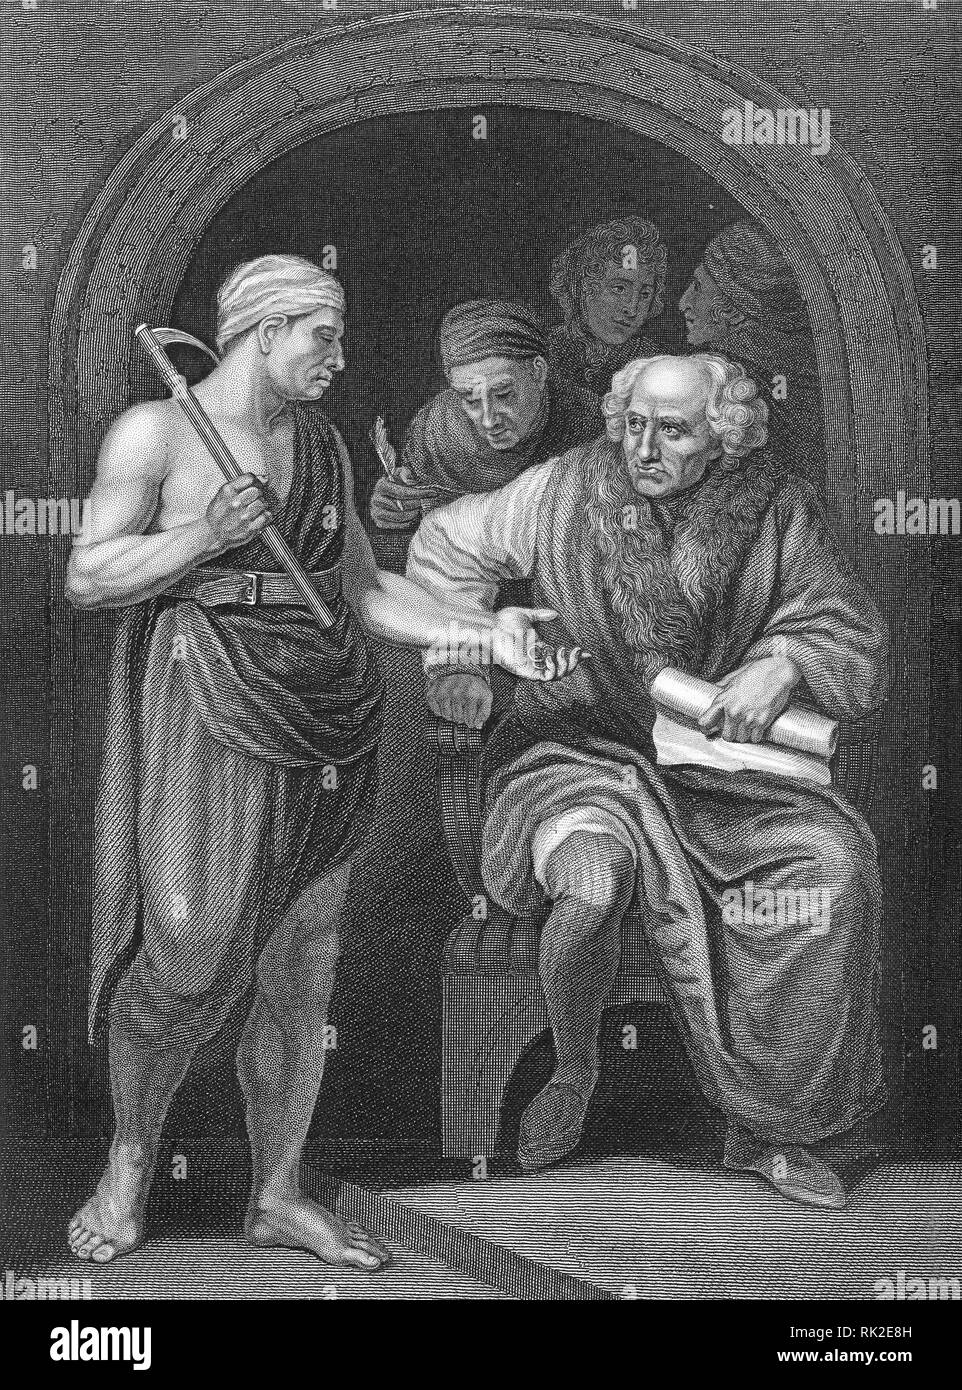 Engraving of the parable where the lord of the vineyard forgives a man his debts. From The Self-Interpeting Bible, perhaps the 1843 edition. Stock Photo